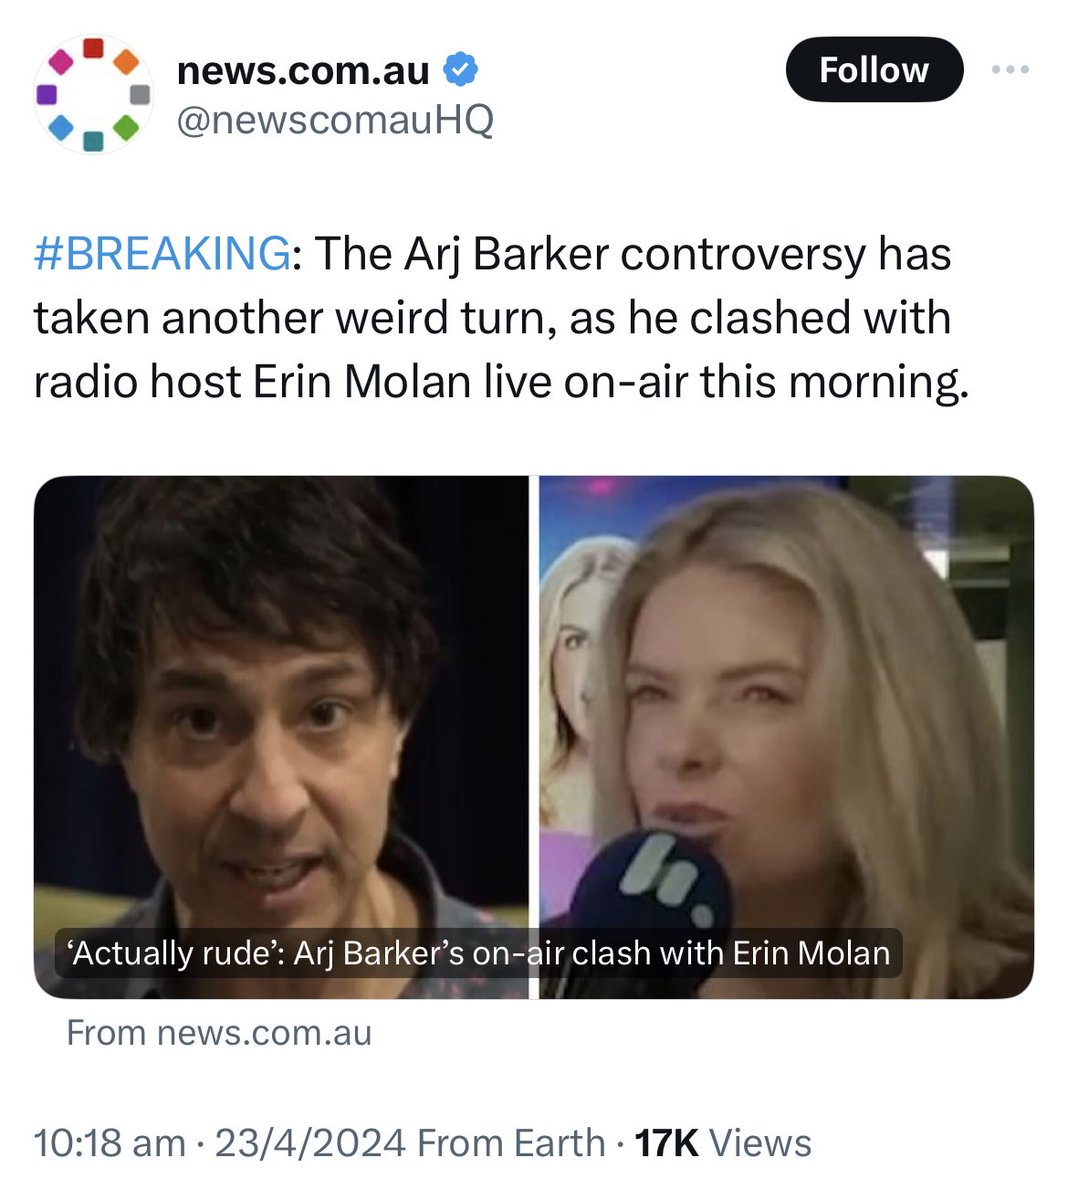 was on the fence before but if he was rude to erin molan then i’m on #TeamArj now, that baby was being a real piece of shit